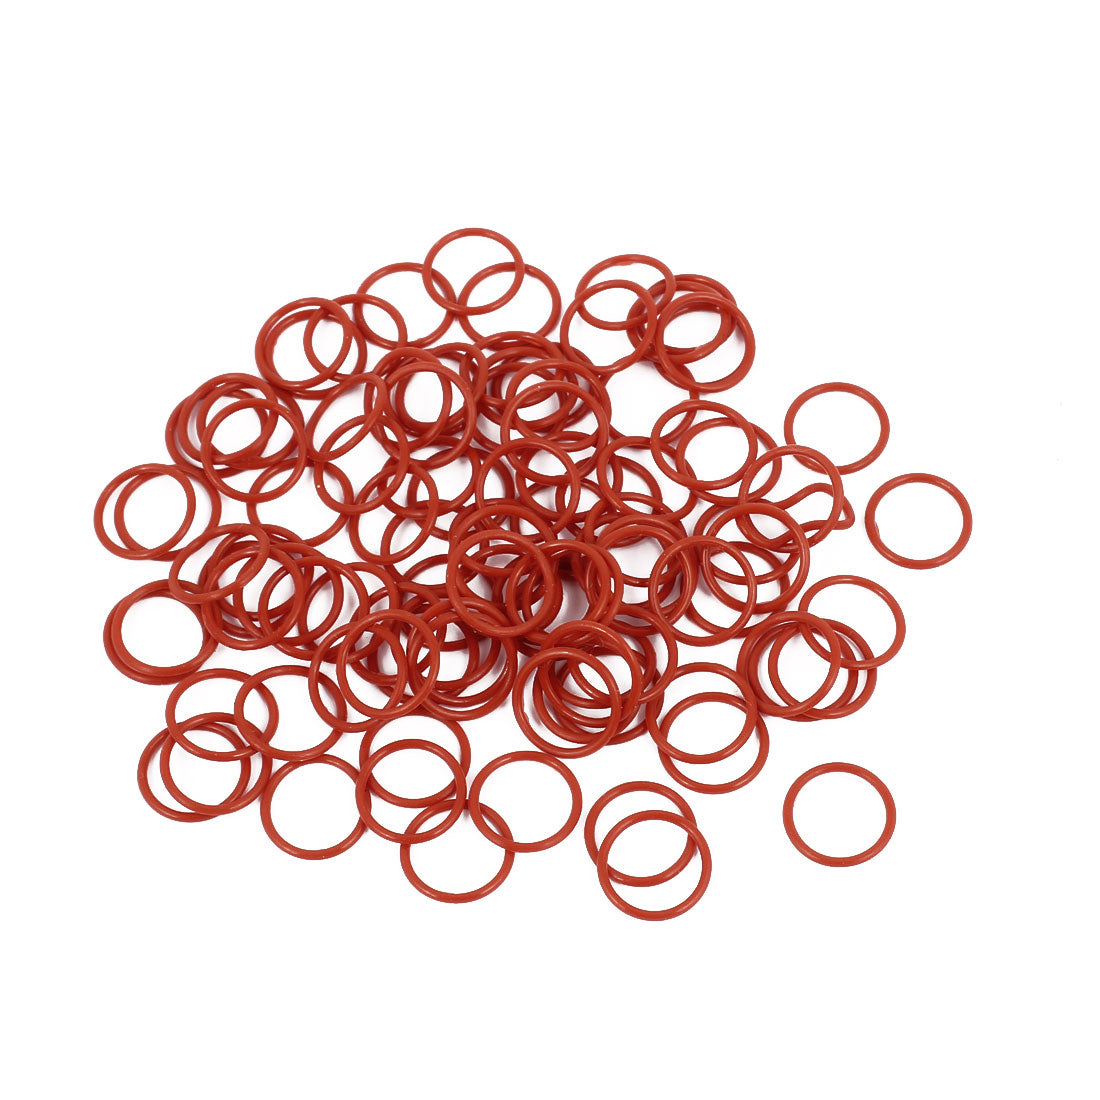 uxcell Uxcell 100Pcs 11mm x 1mm Rubber O-rings NBR Heat Resistant Sealing Ring Grommets Red